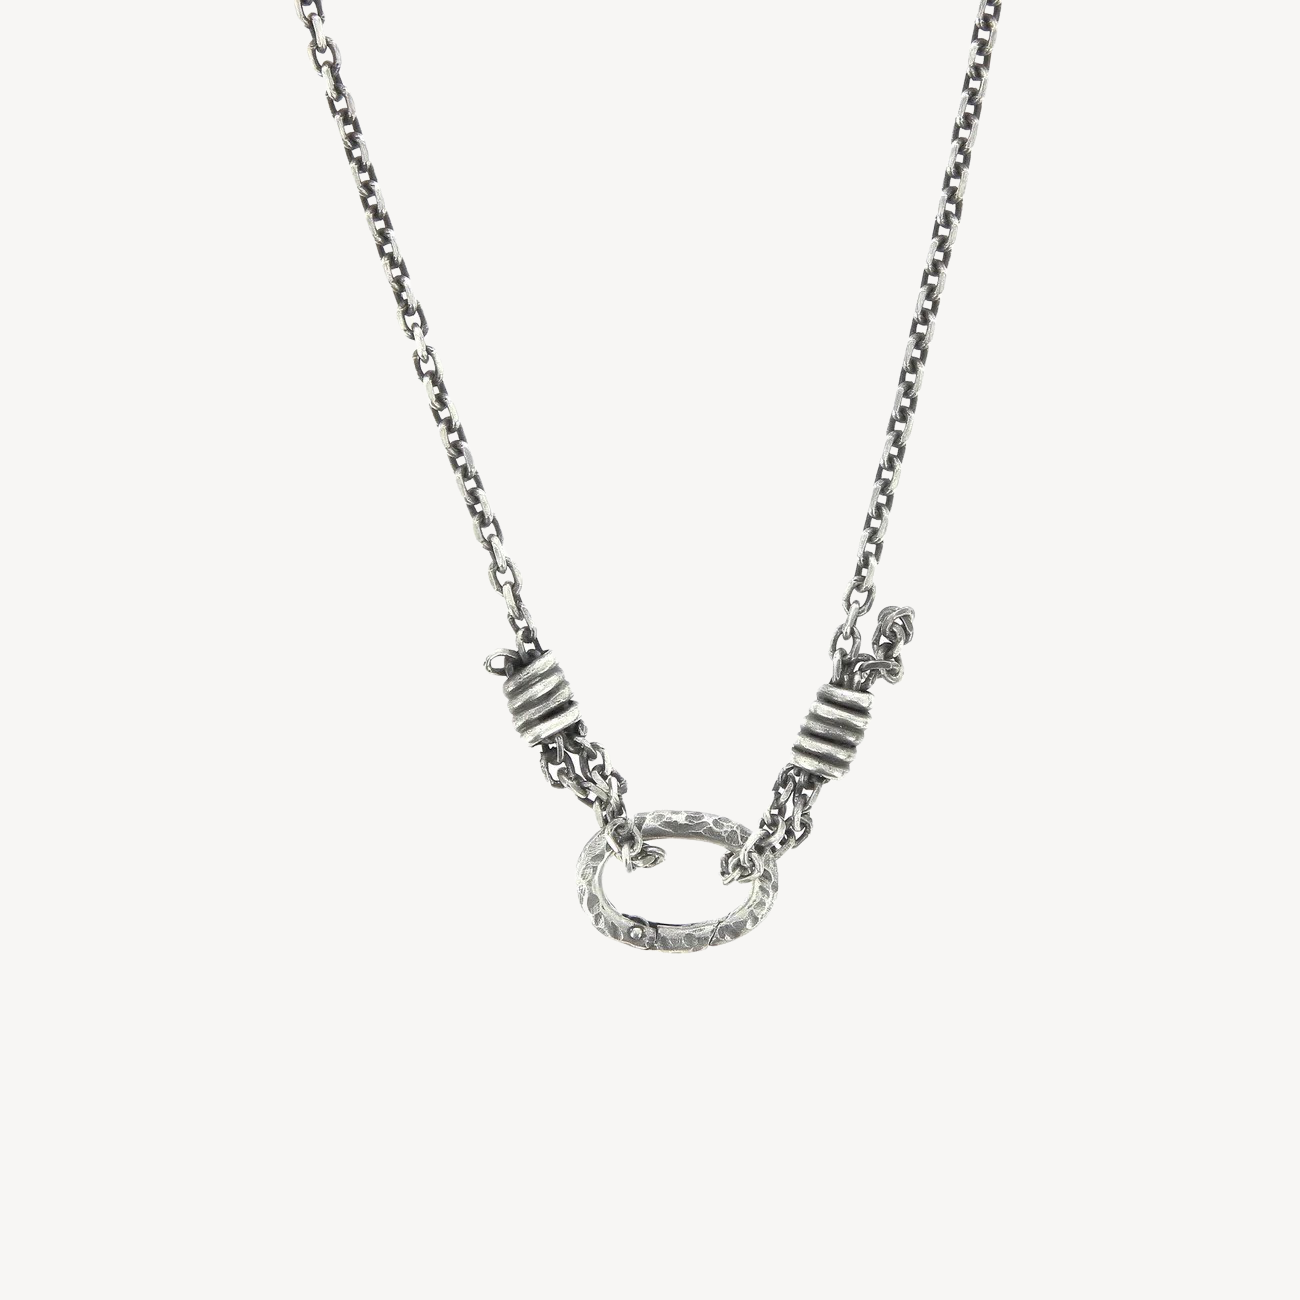 Front clasp chain